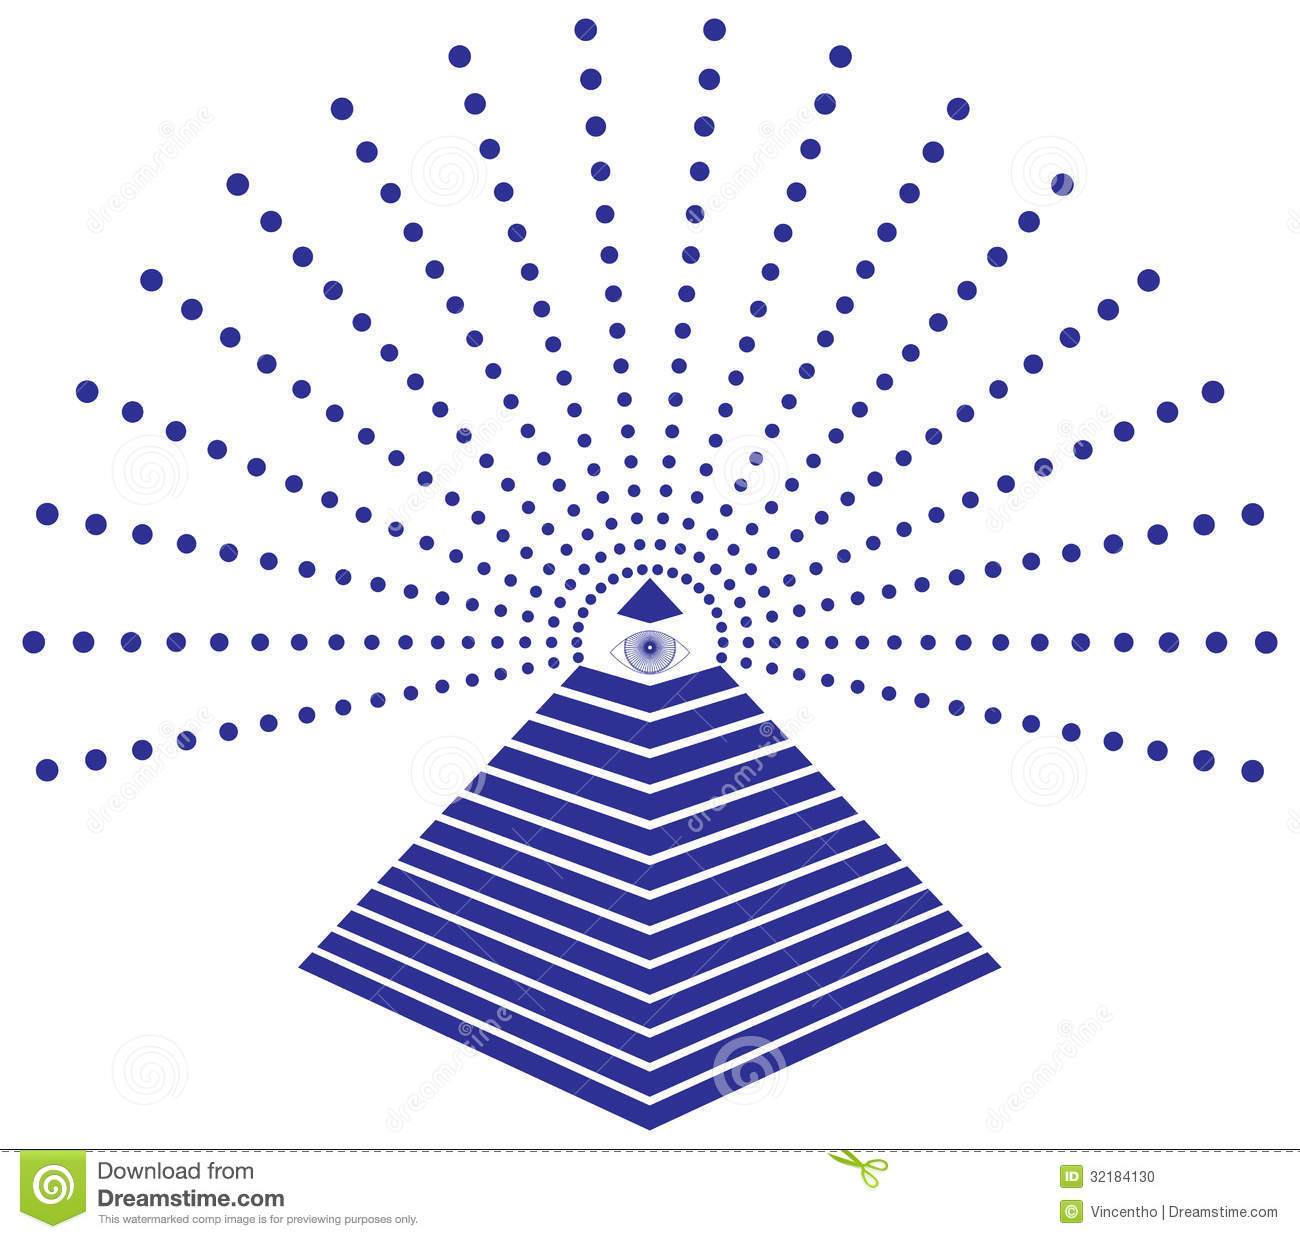 Concept Illustration Of The All Seeing Eye Of God Surrounded By Rays